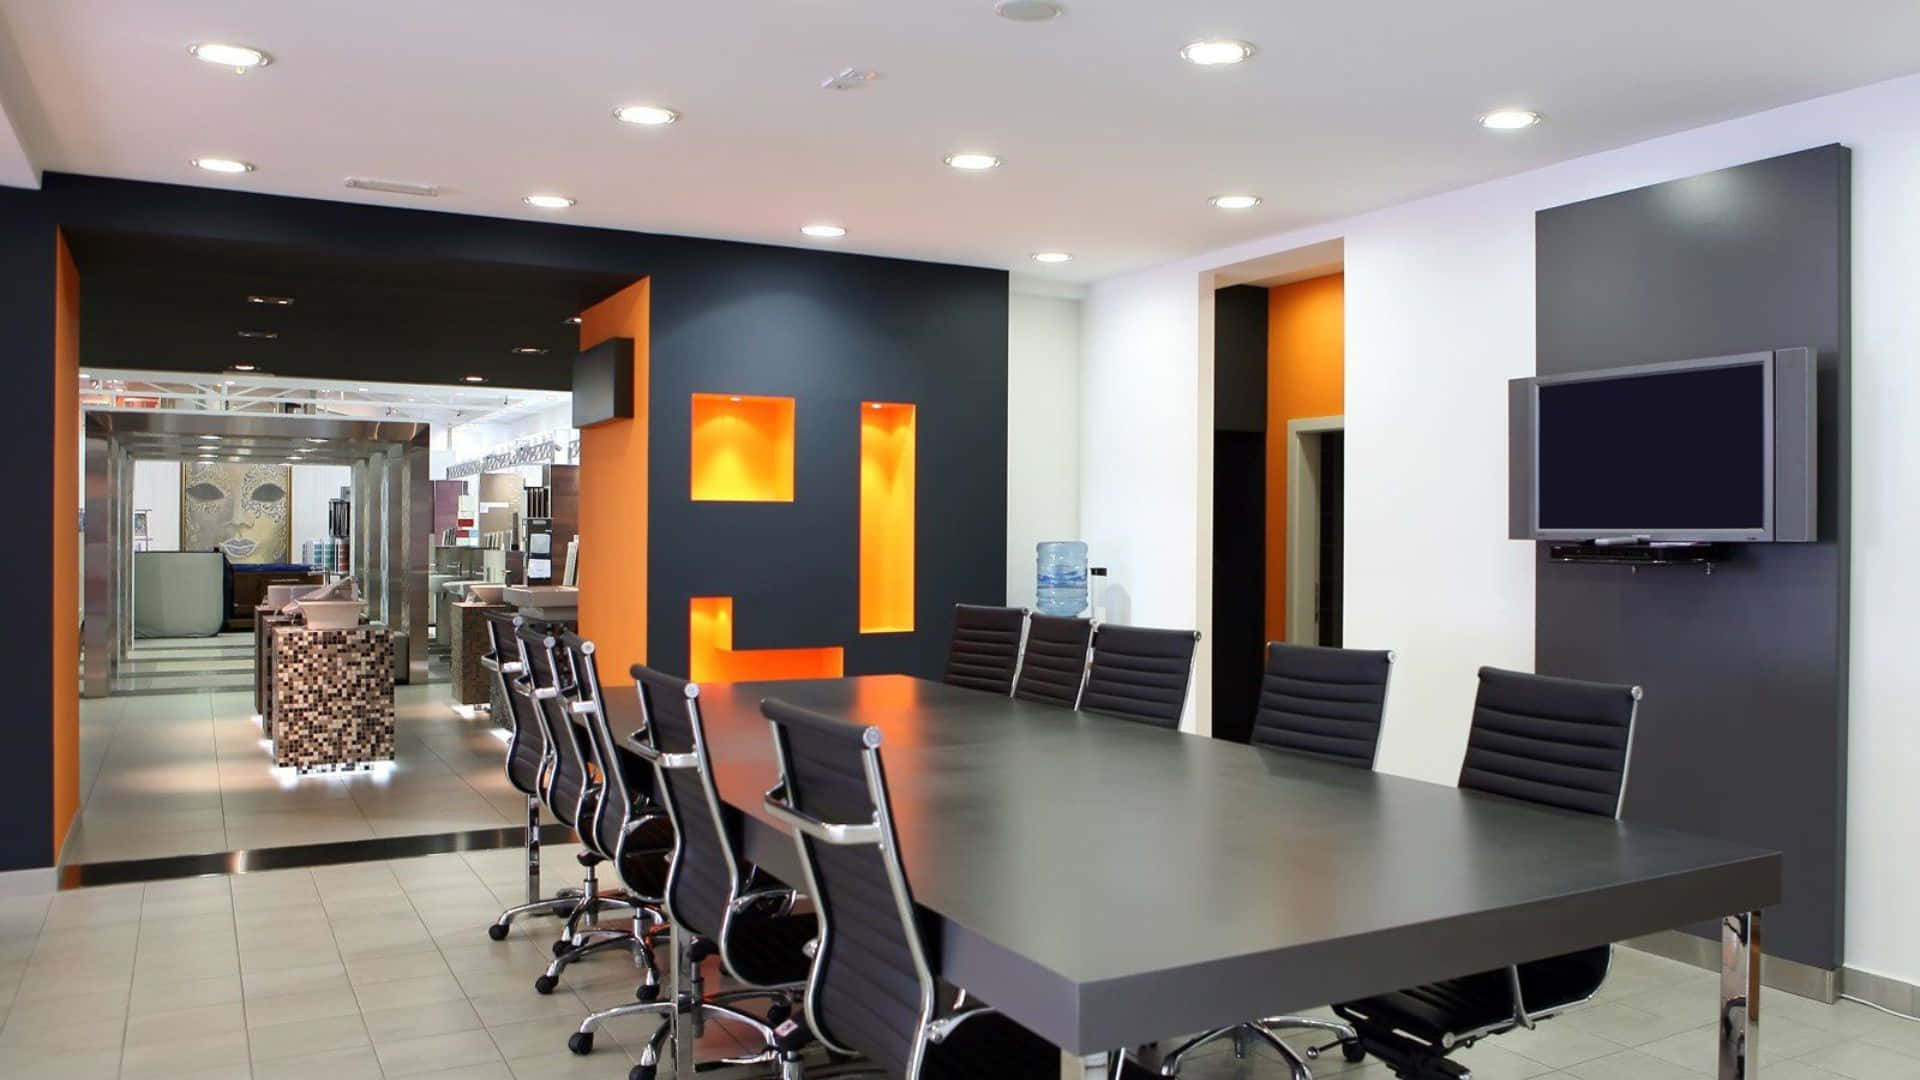 A Conference Room With Orange Walls And Black Furniture